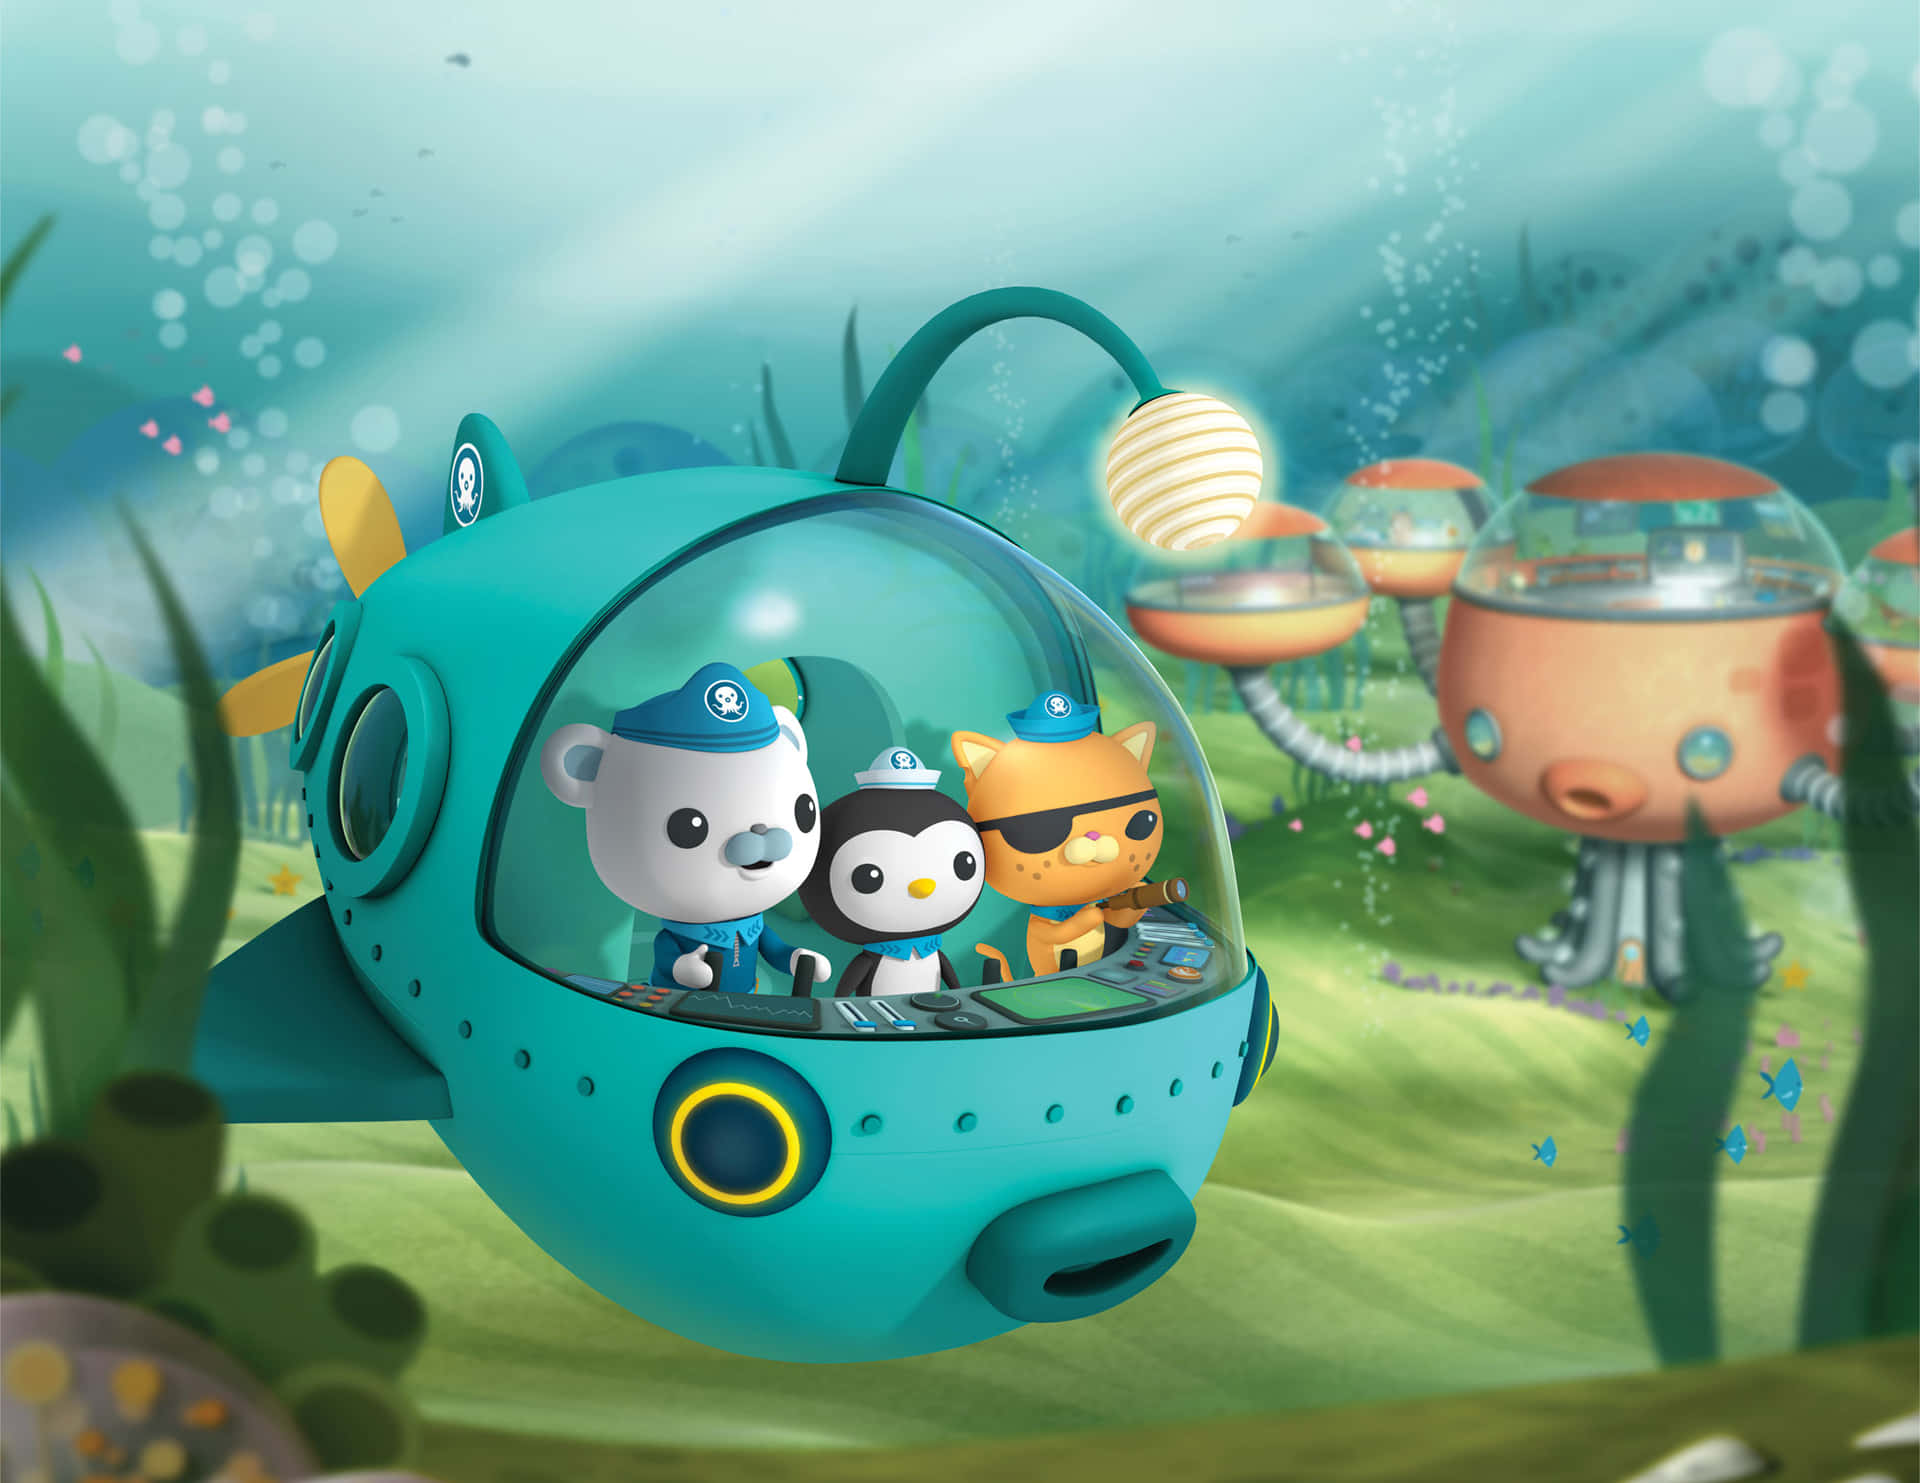 Swim alongside the Octonauts and explore the wonders of our ocean! Wallpaper